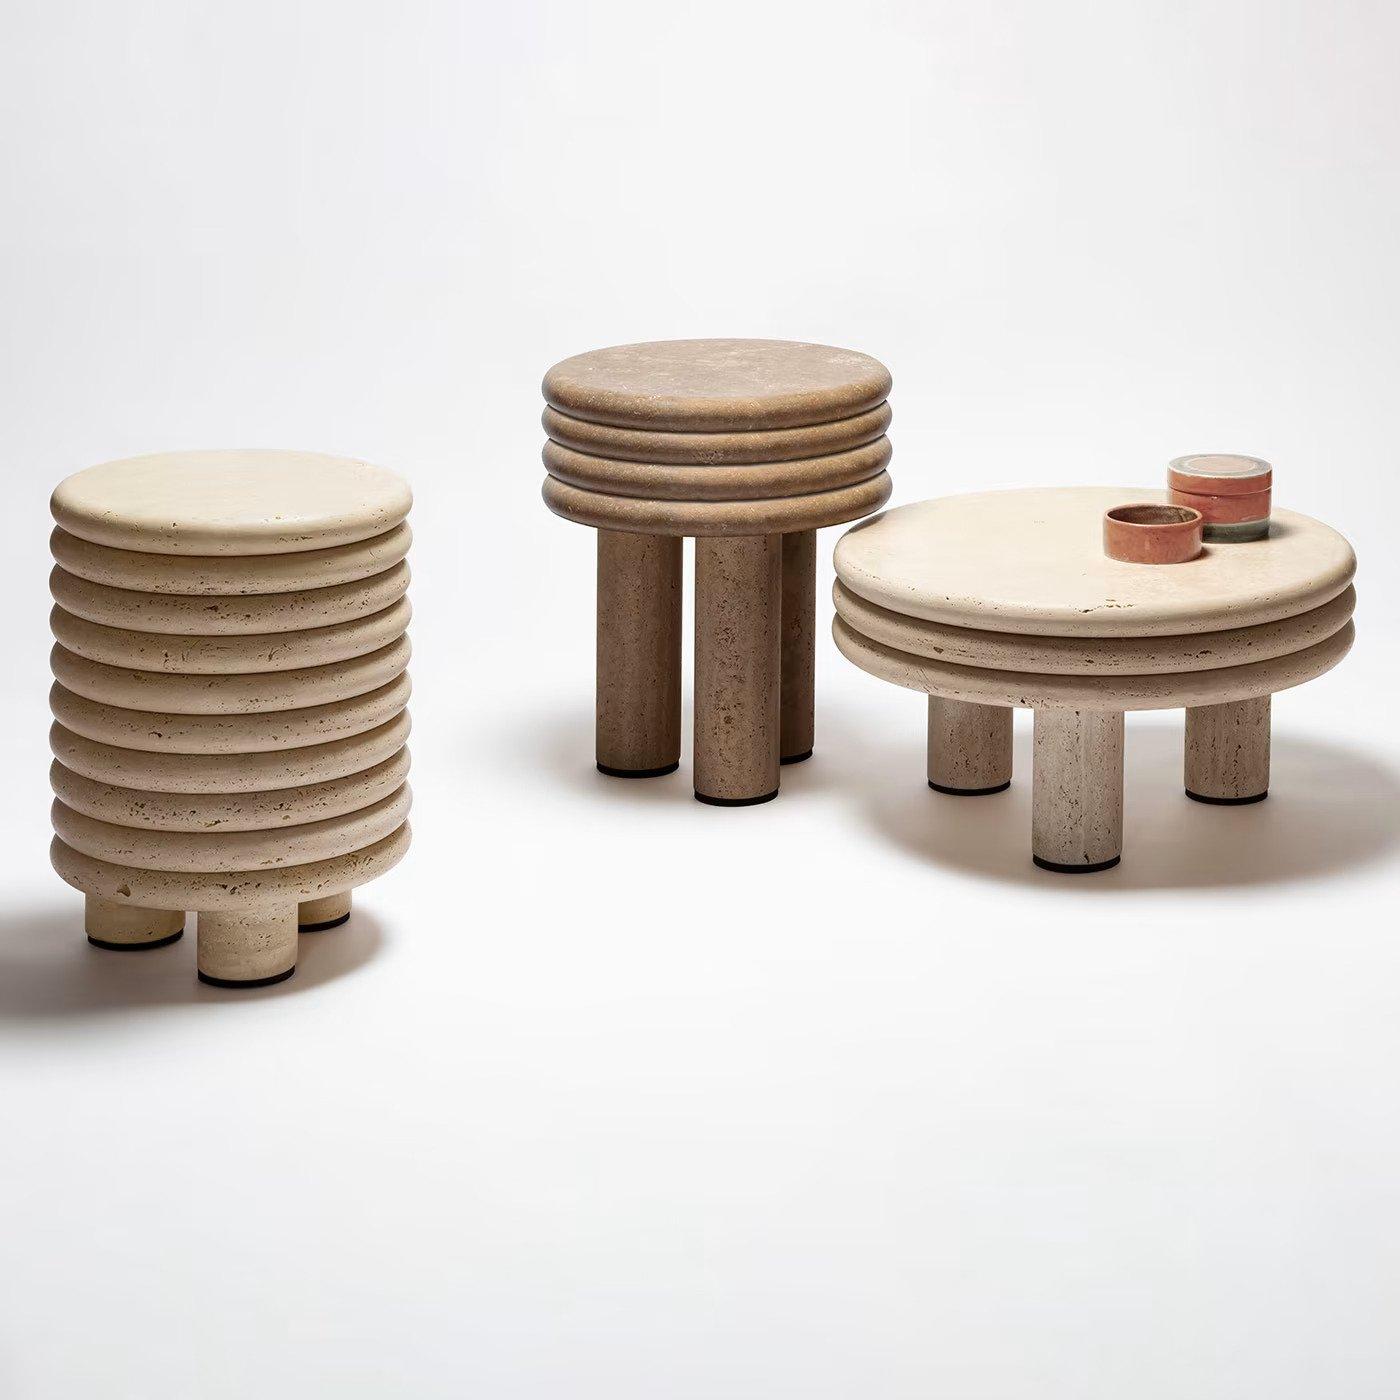 Contemporary round small high coffee table stool - Scala by Stephane Parmentier for Giobagnara.

Organic shapes take center stage in the Scala Collections designed by Stephane Parmentier for Giobagnara. Featured in travertine, this stool boasts